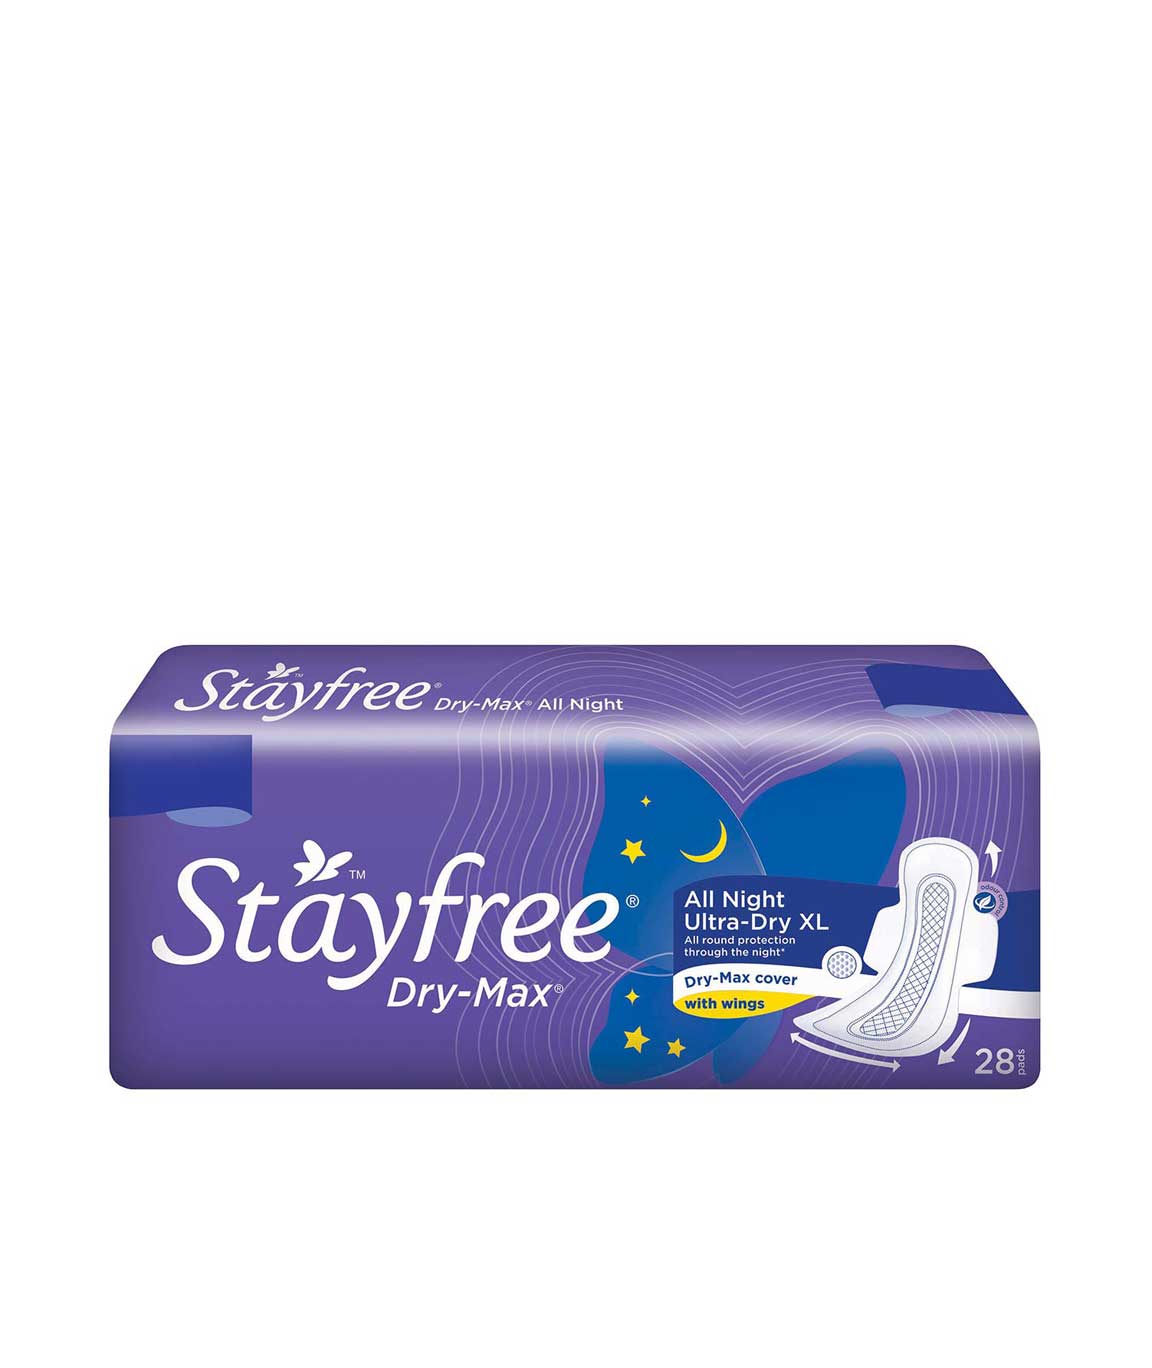 Stayfree Dry Max All Night Sanitary napkins (28 Count) & All Night XL Dry Max Cover Sanitary Napkins - 42 Pads (Super Saver Pack) Combo